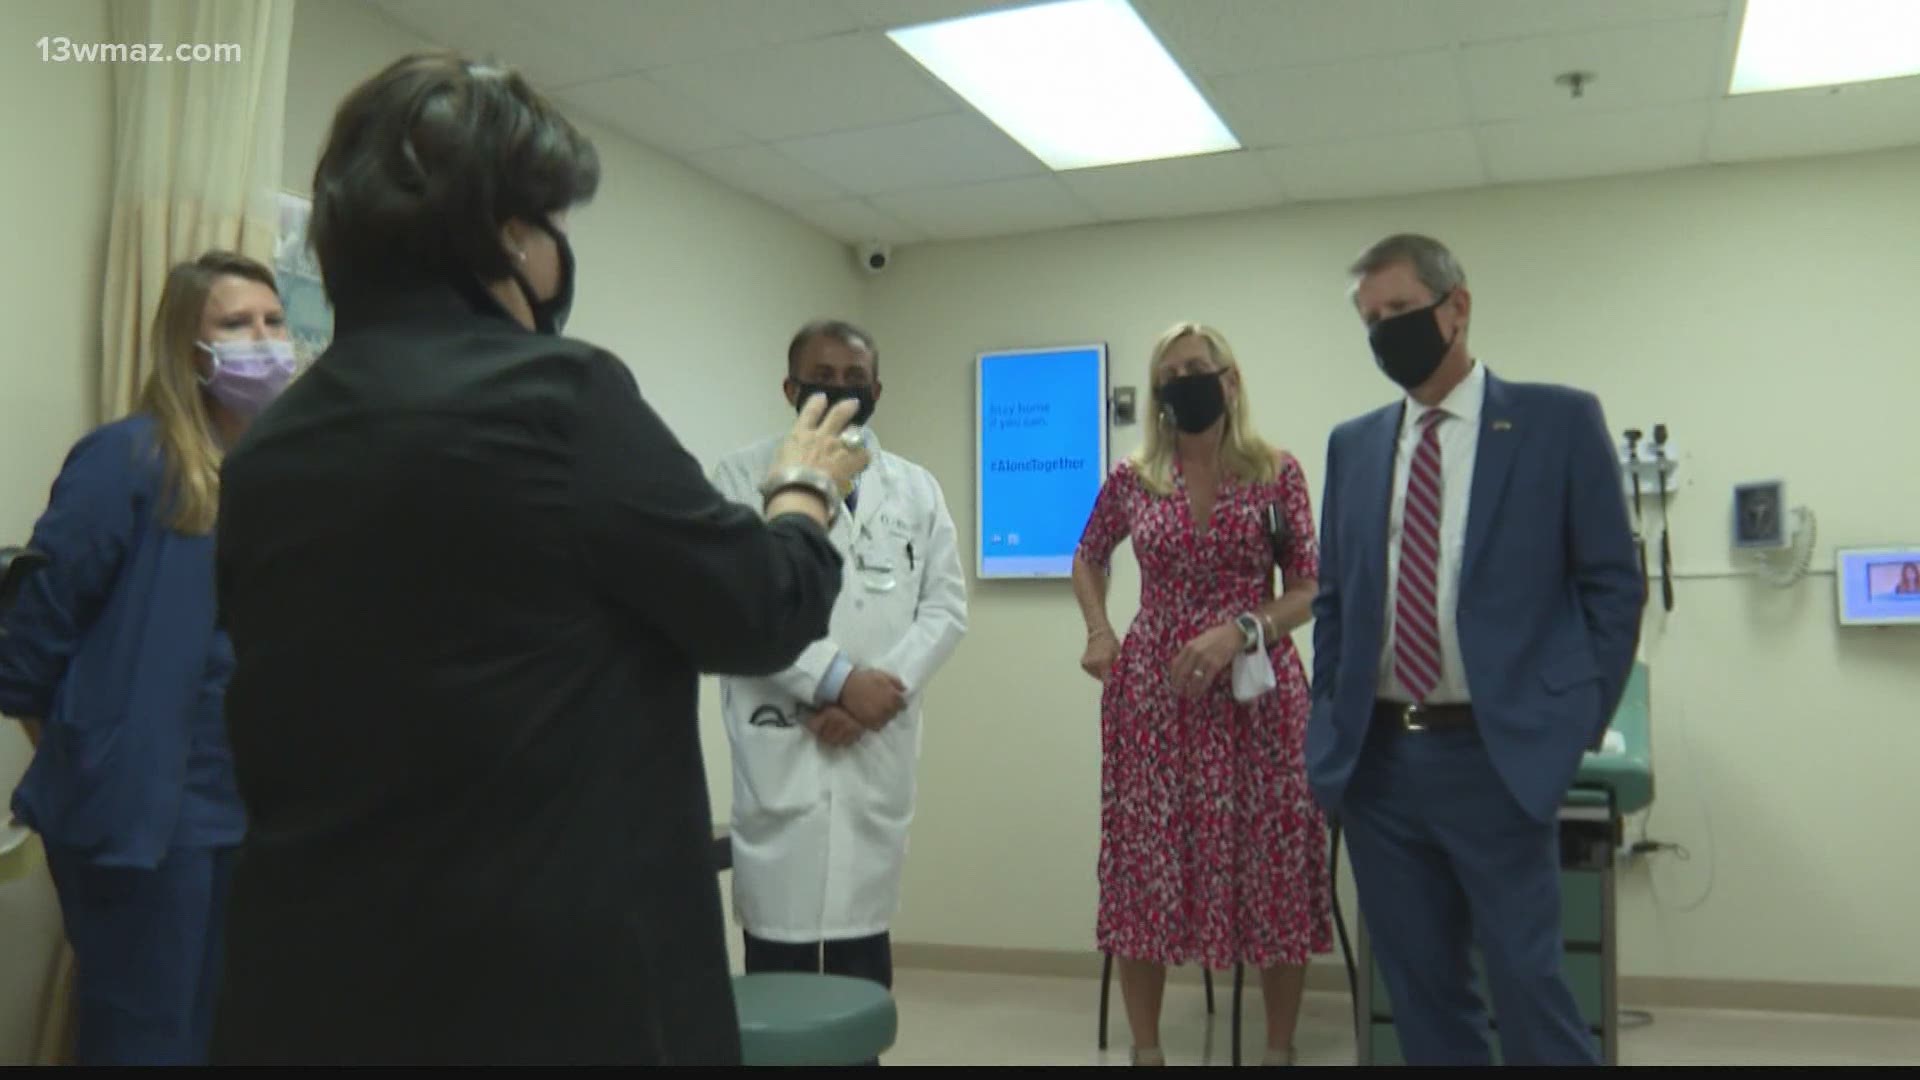 Governor Kemp got the first look at a new virtual care system for COVID-19 patients. Navicent says it's the first of its kind in the state of Georgia.